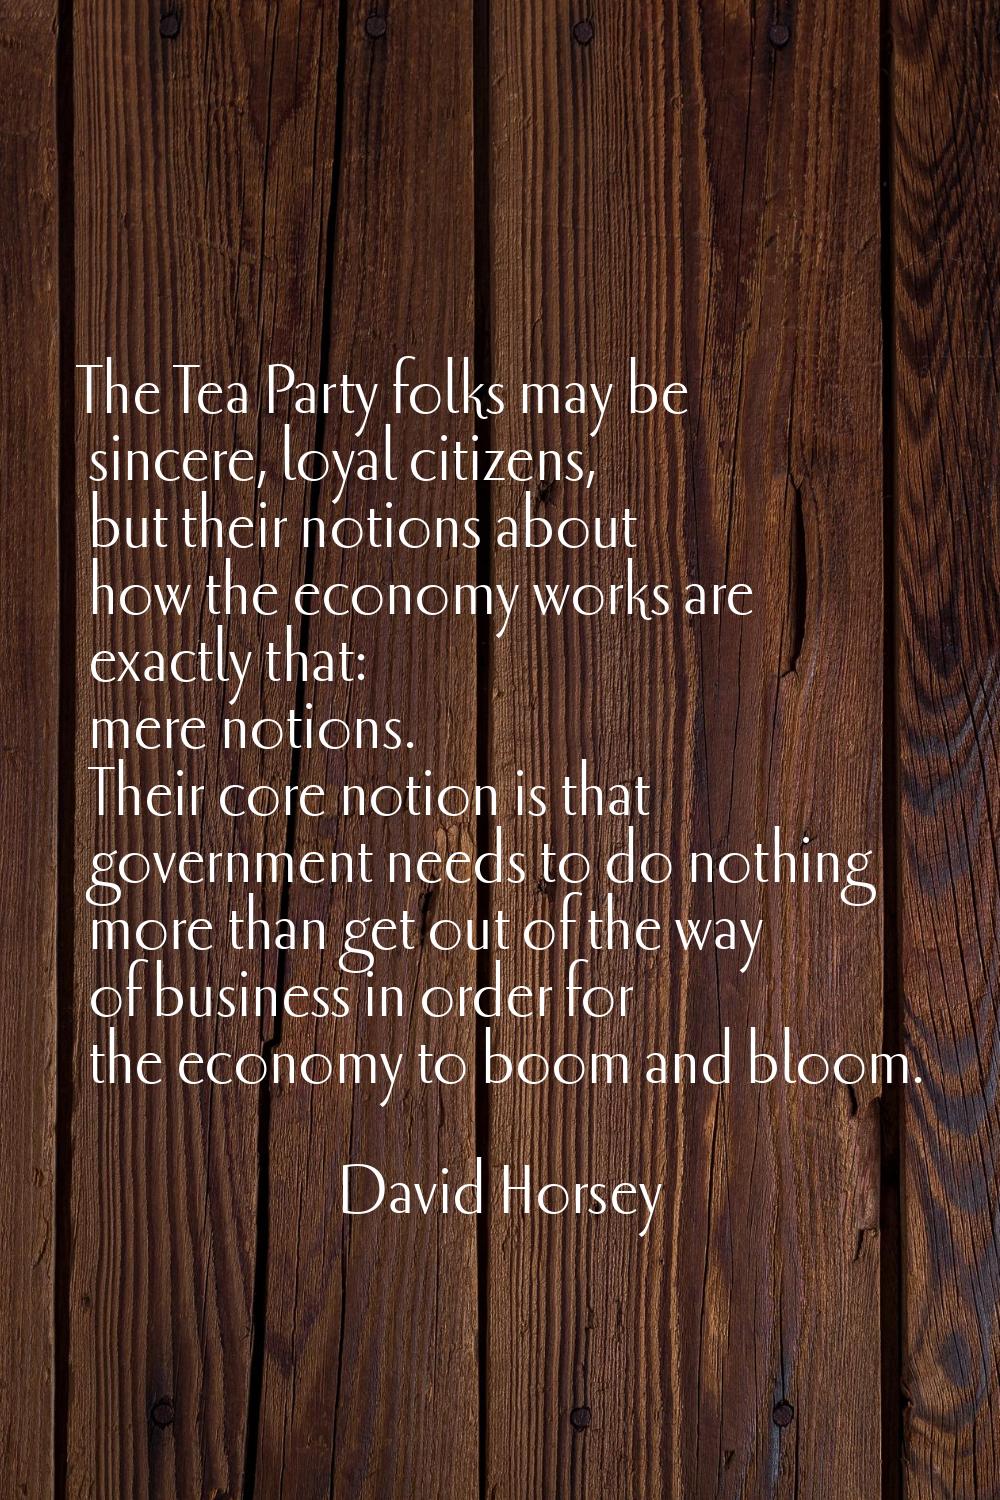 The Tea Party folks may be sincere, loyal citizens, but their notions about how the economy works a